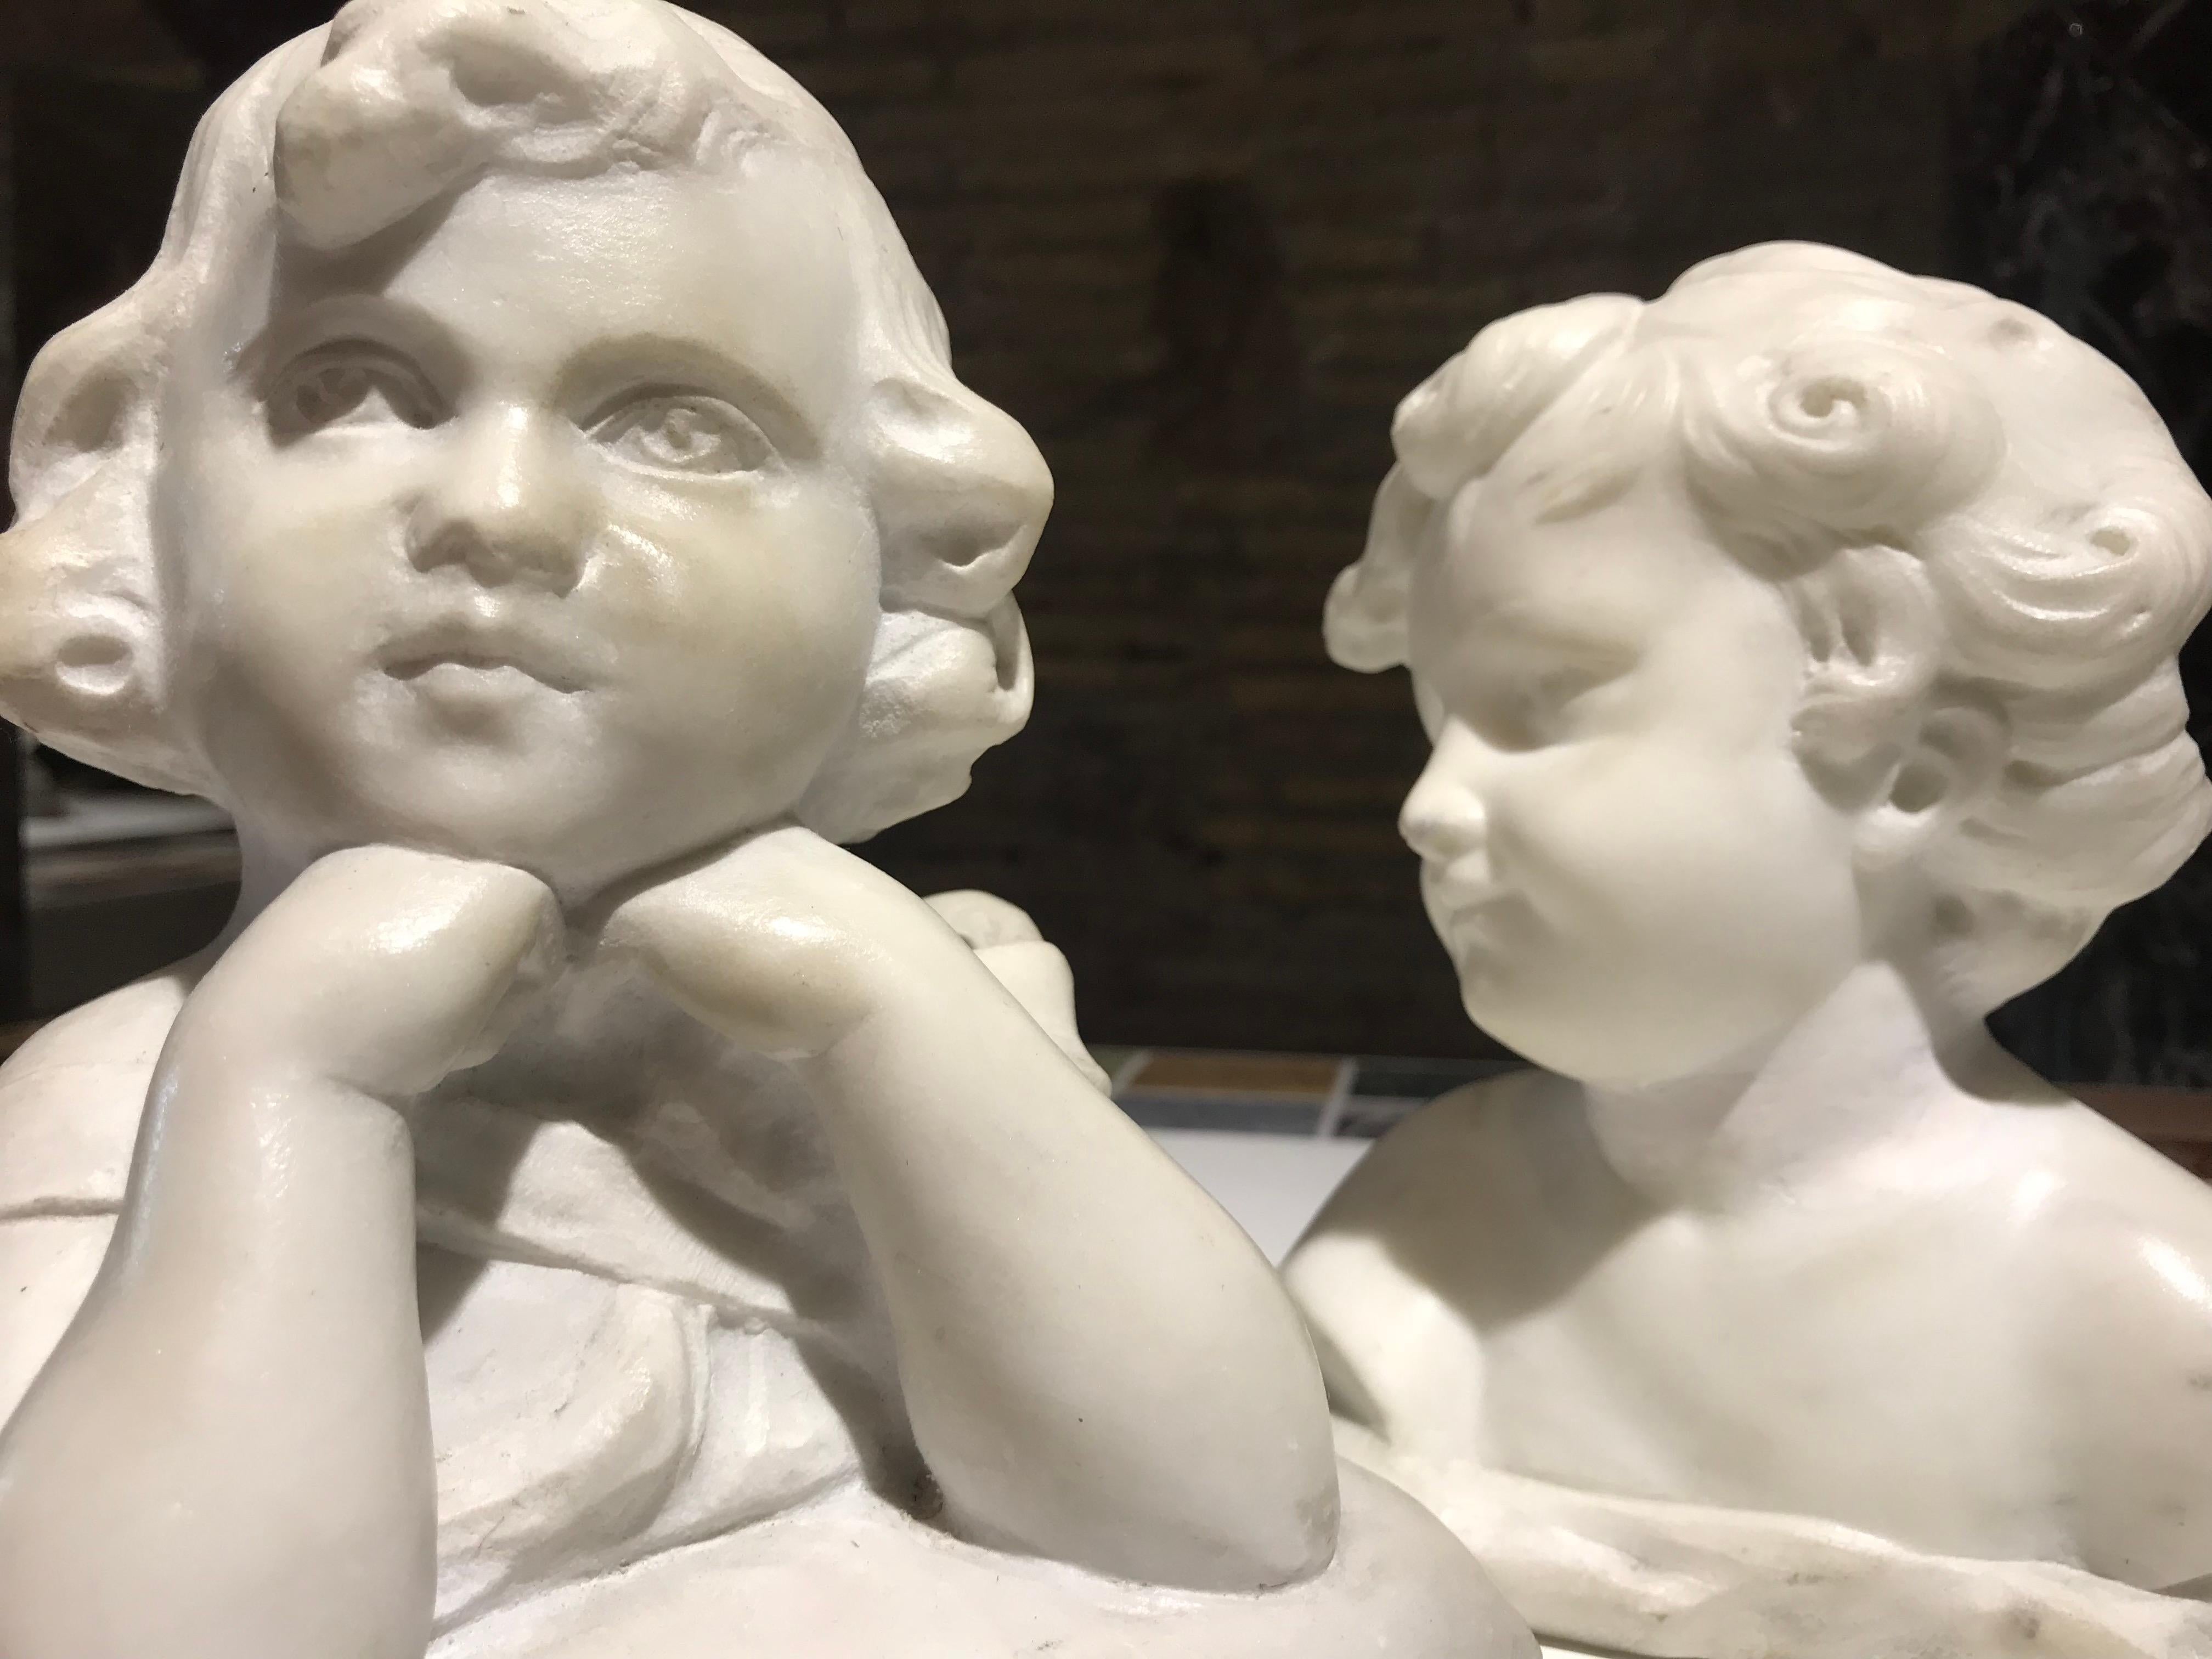 A very beautiful pair of sculpture of cherub, carved in white statuary marble. The quality of the carving and the care of the expression advise that these two pieces were made by a very able sculptor. Must be noted that 5these two sculptures are